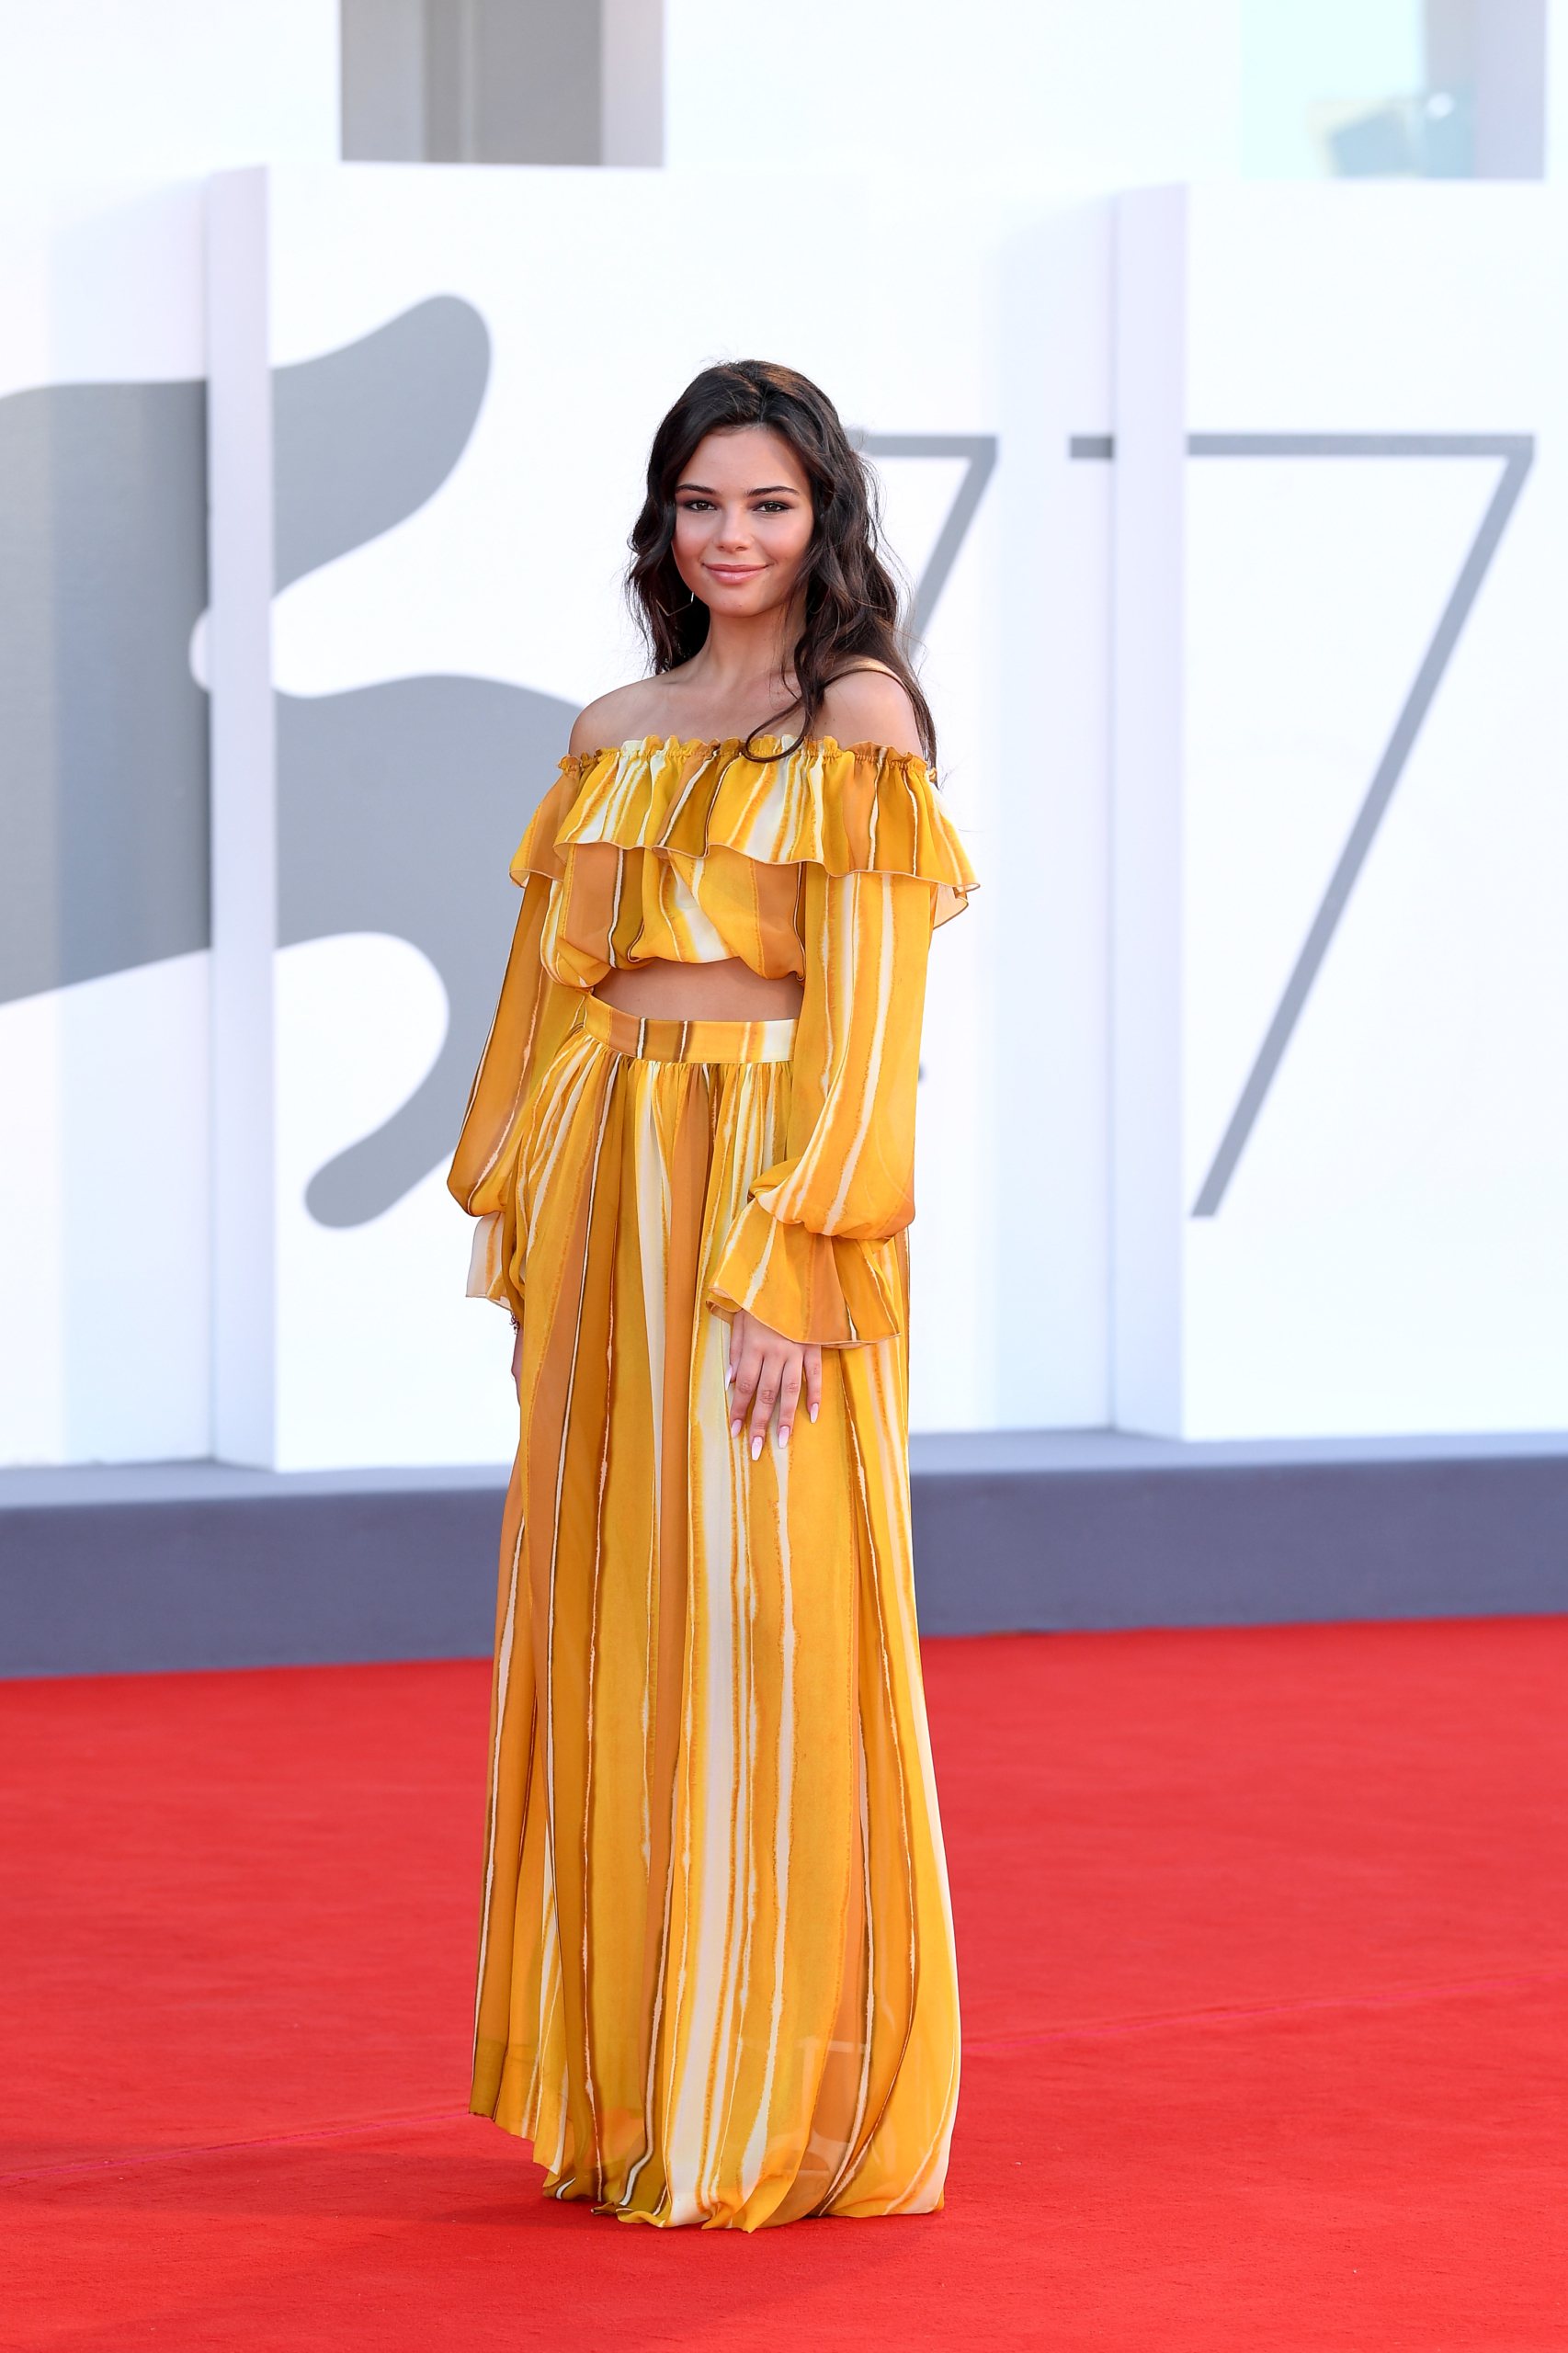 &quot;Lacci&quot; Red Carpet And Opening Ceremony Red Carpet Arrivals - The 77th Venice Film Festival